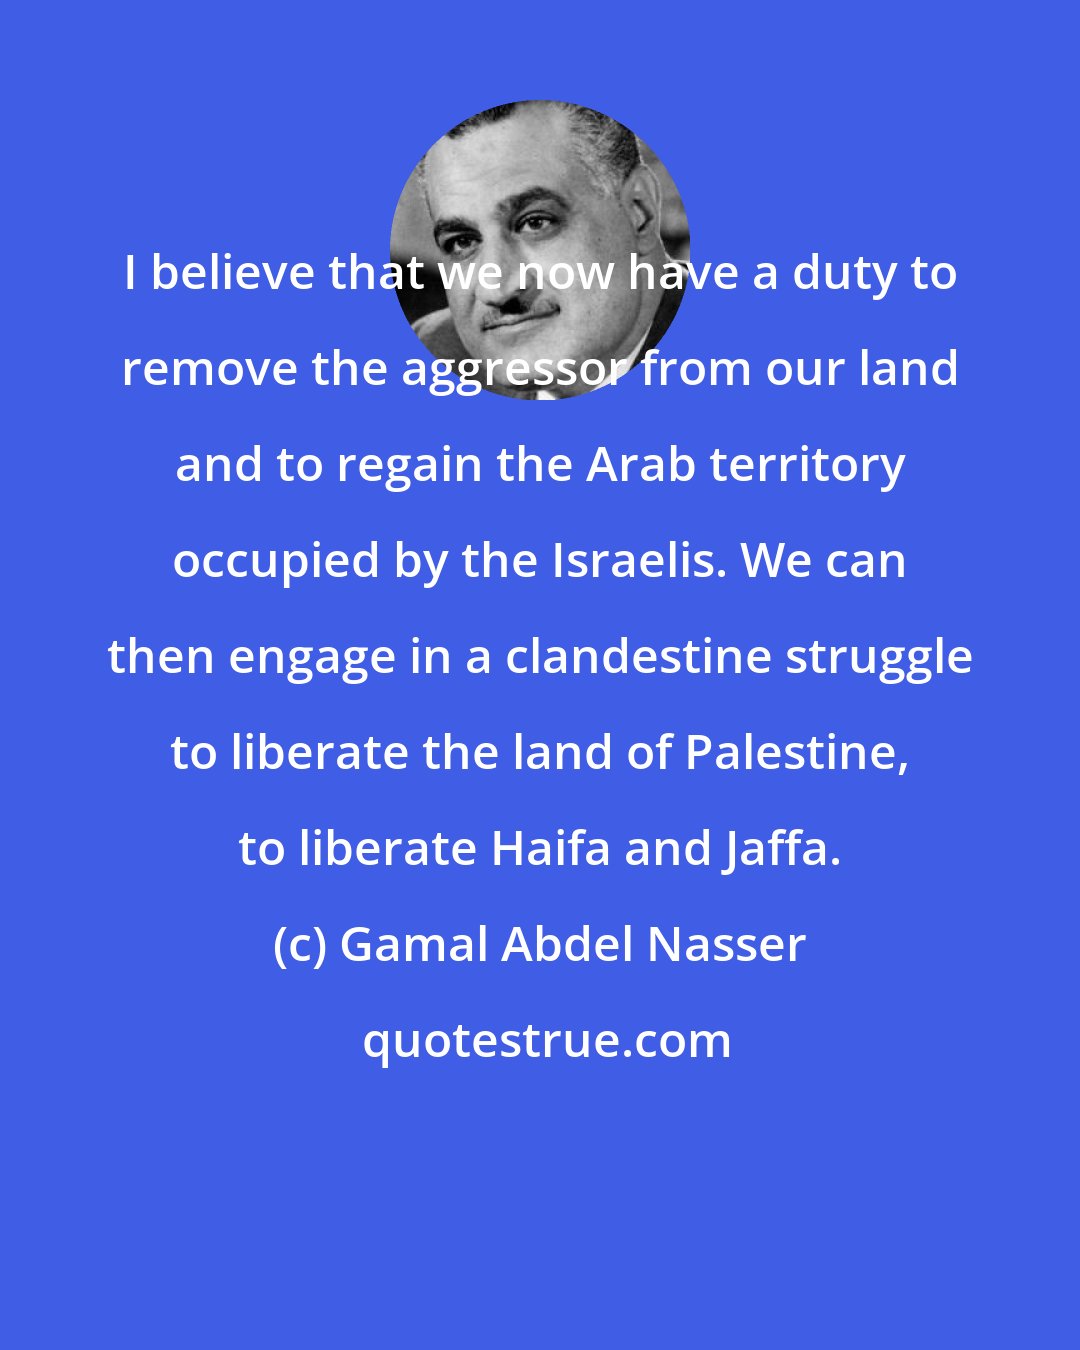 Gamal Abdel Nasser: I believe that we now have a duty to remove the aggressor from our land and to regain the Arab territory occupied by the Israelis. We can then engage in a clandestine struggle to liberate the land of Palestine, to liberate Haifa and Jaffa.